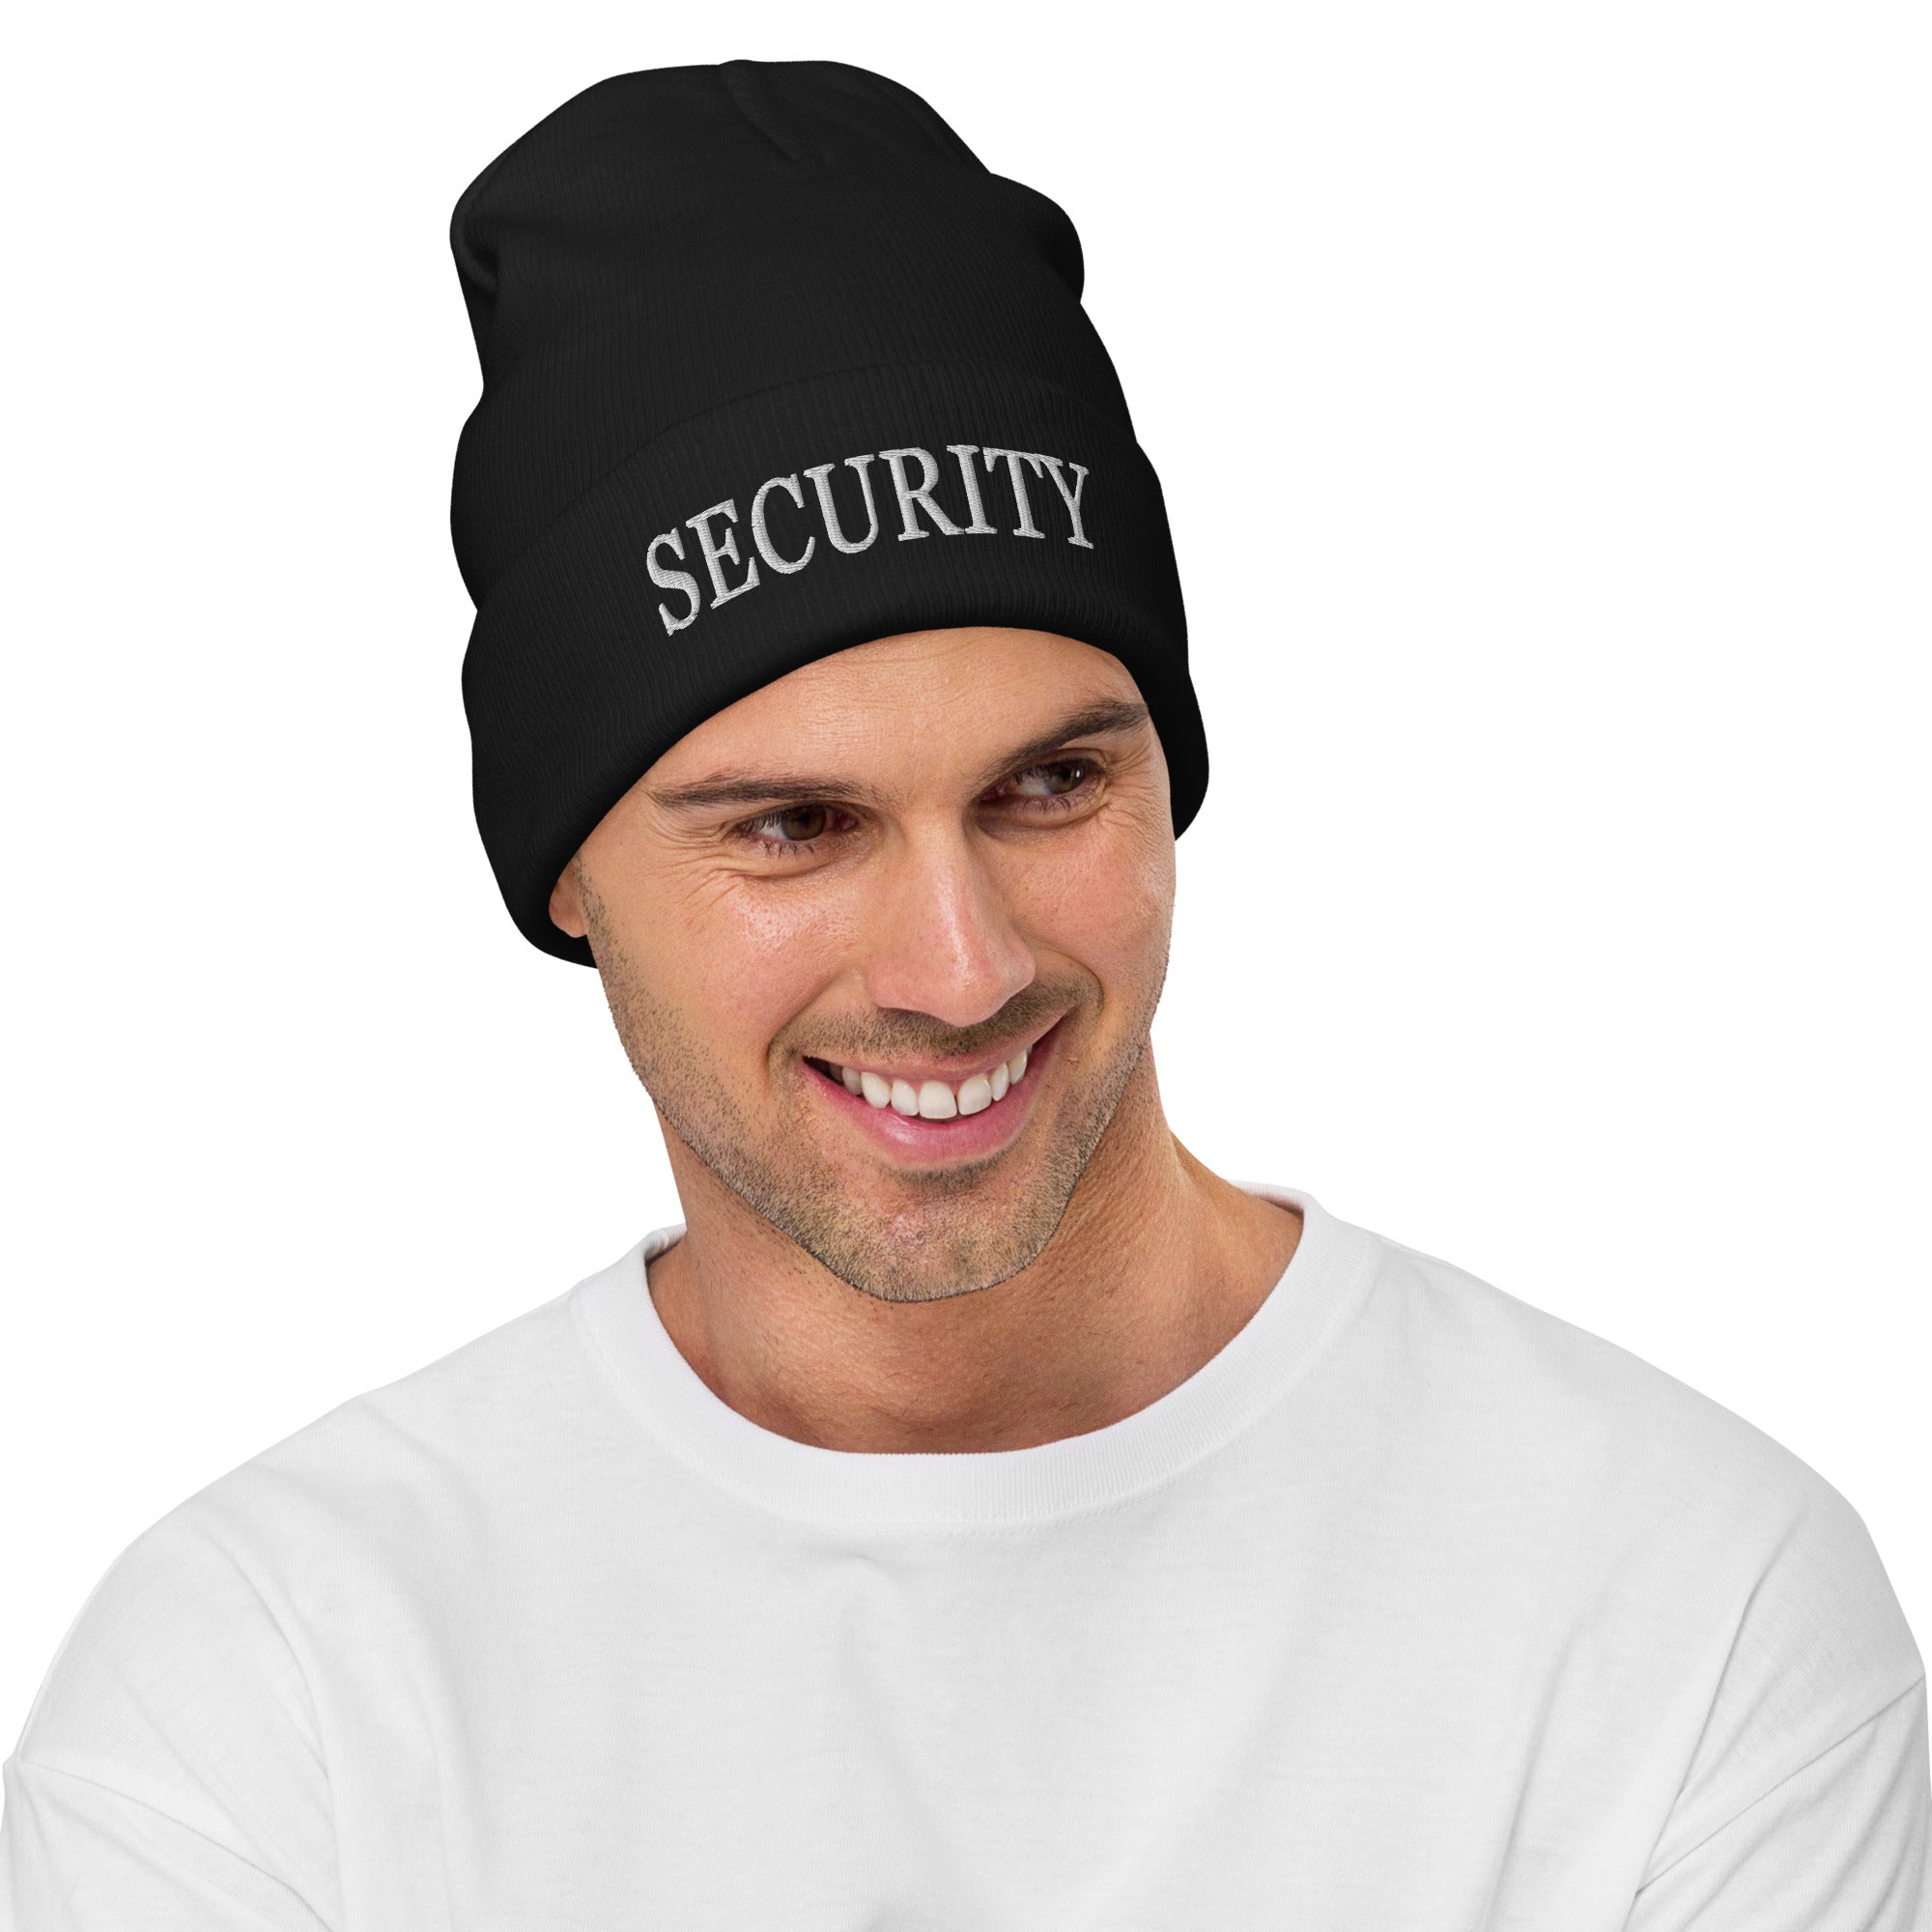 Security Embroidered Cuff Beanie FNAF Cosplay Five Nights at Freddy's - Edge of Life Designs